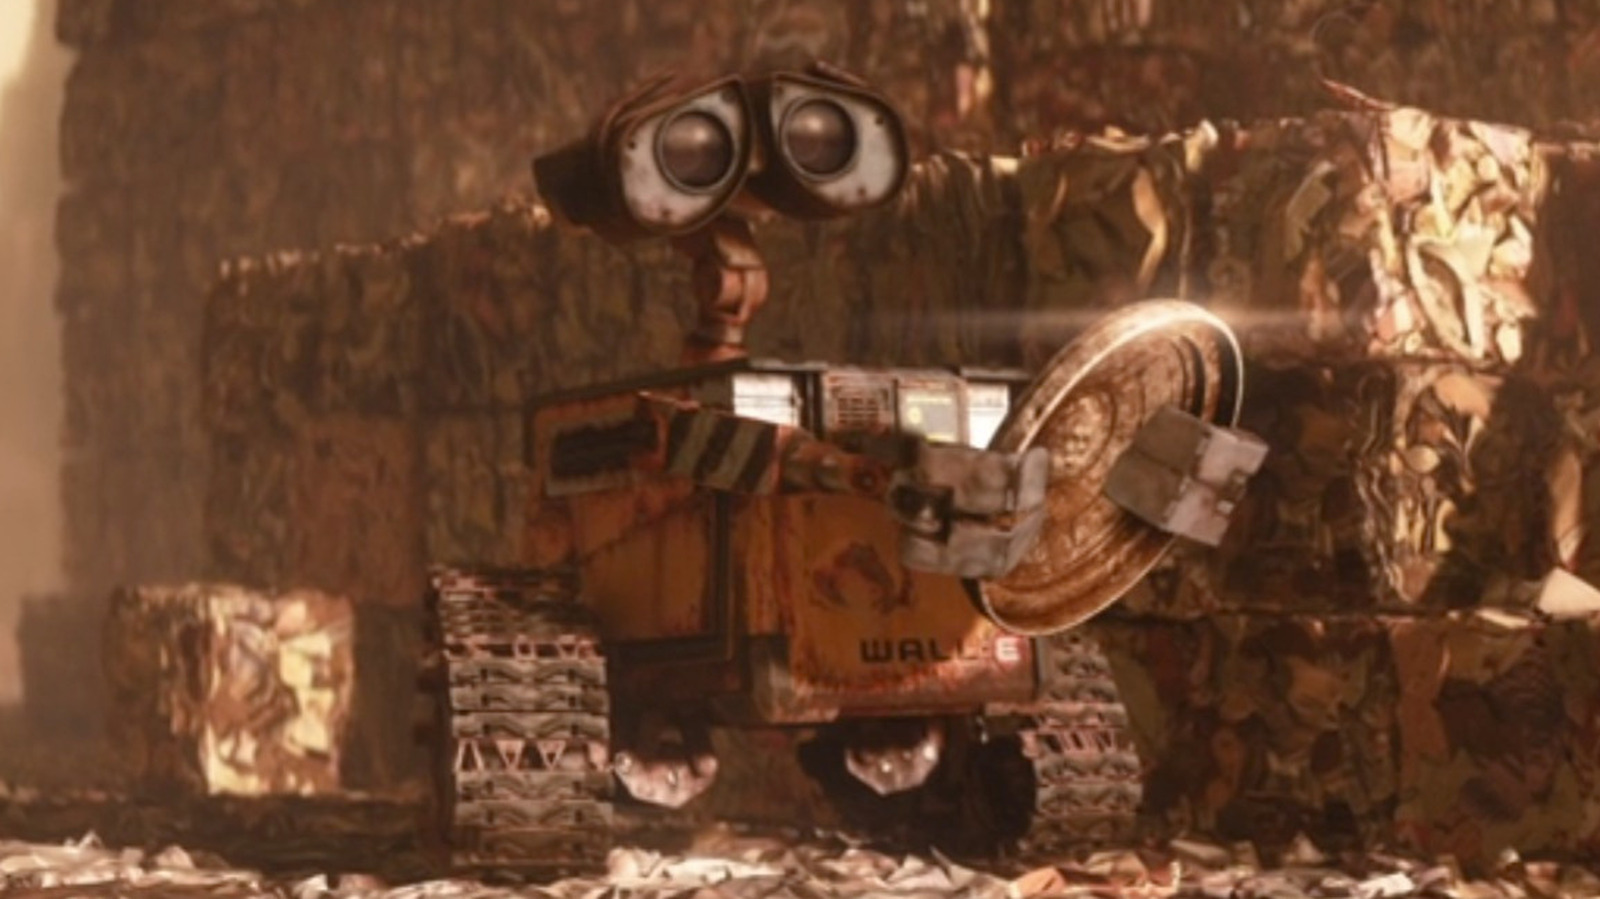 slashfilm.com - Jenna Busch - The Daily Stream: Soothe Your Robot Uprising Fears With WALL-E